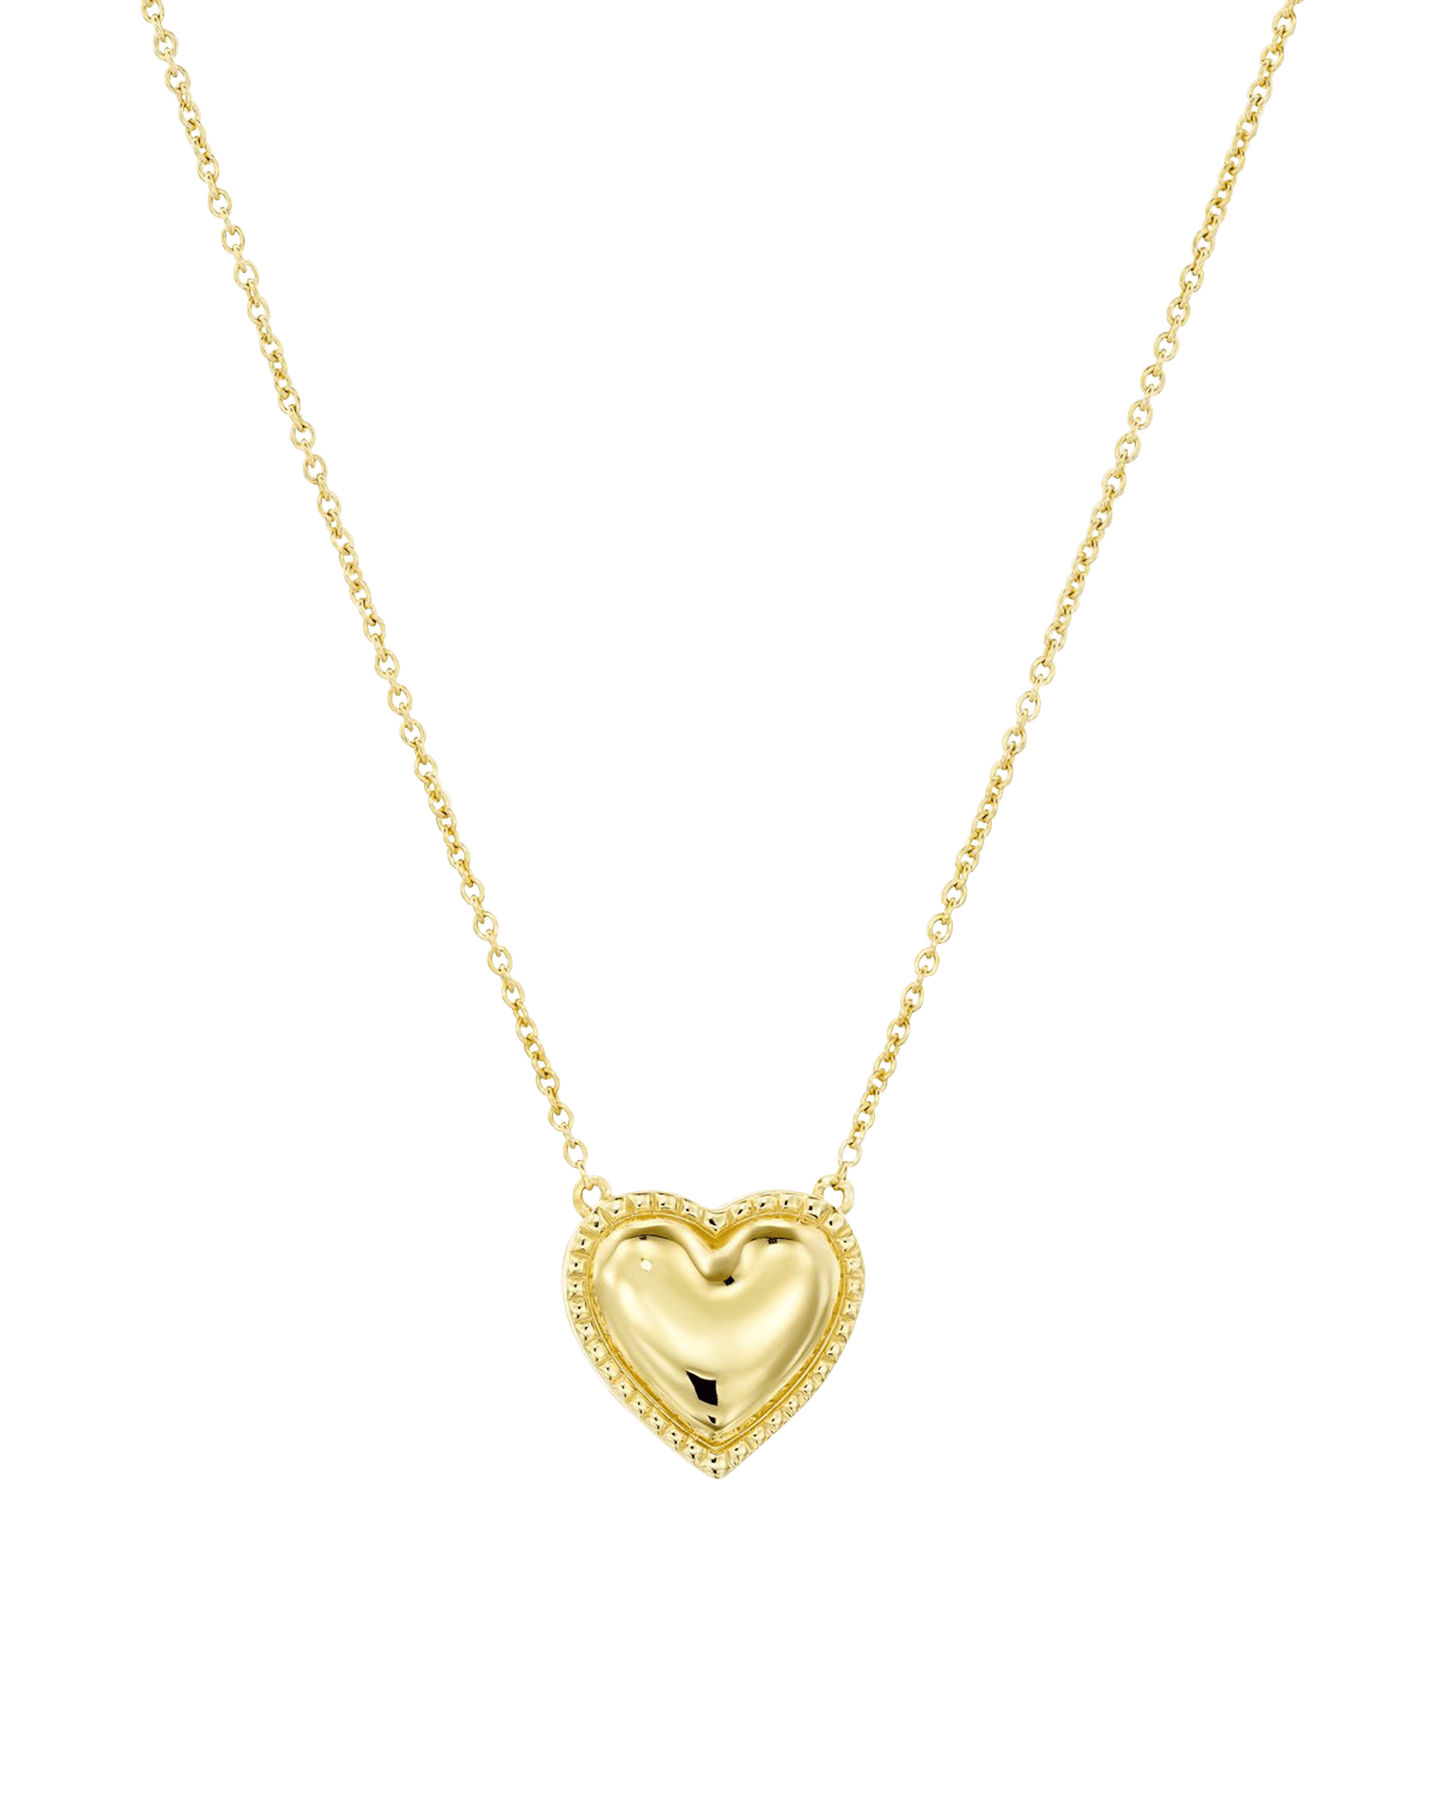 Heart Pendant Necklace - 925 Sterling Silver Necklaces magal-dev 